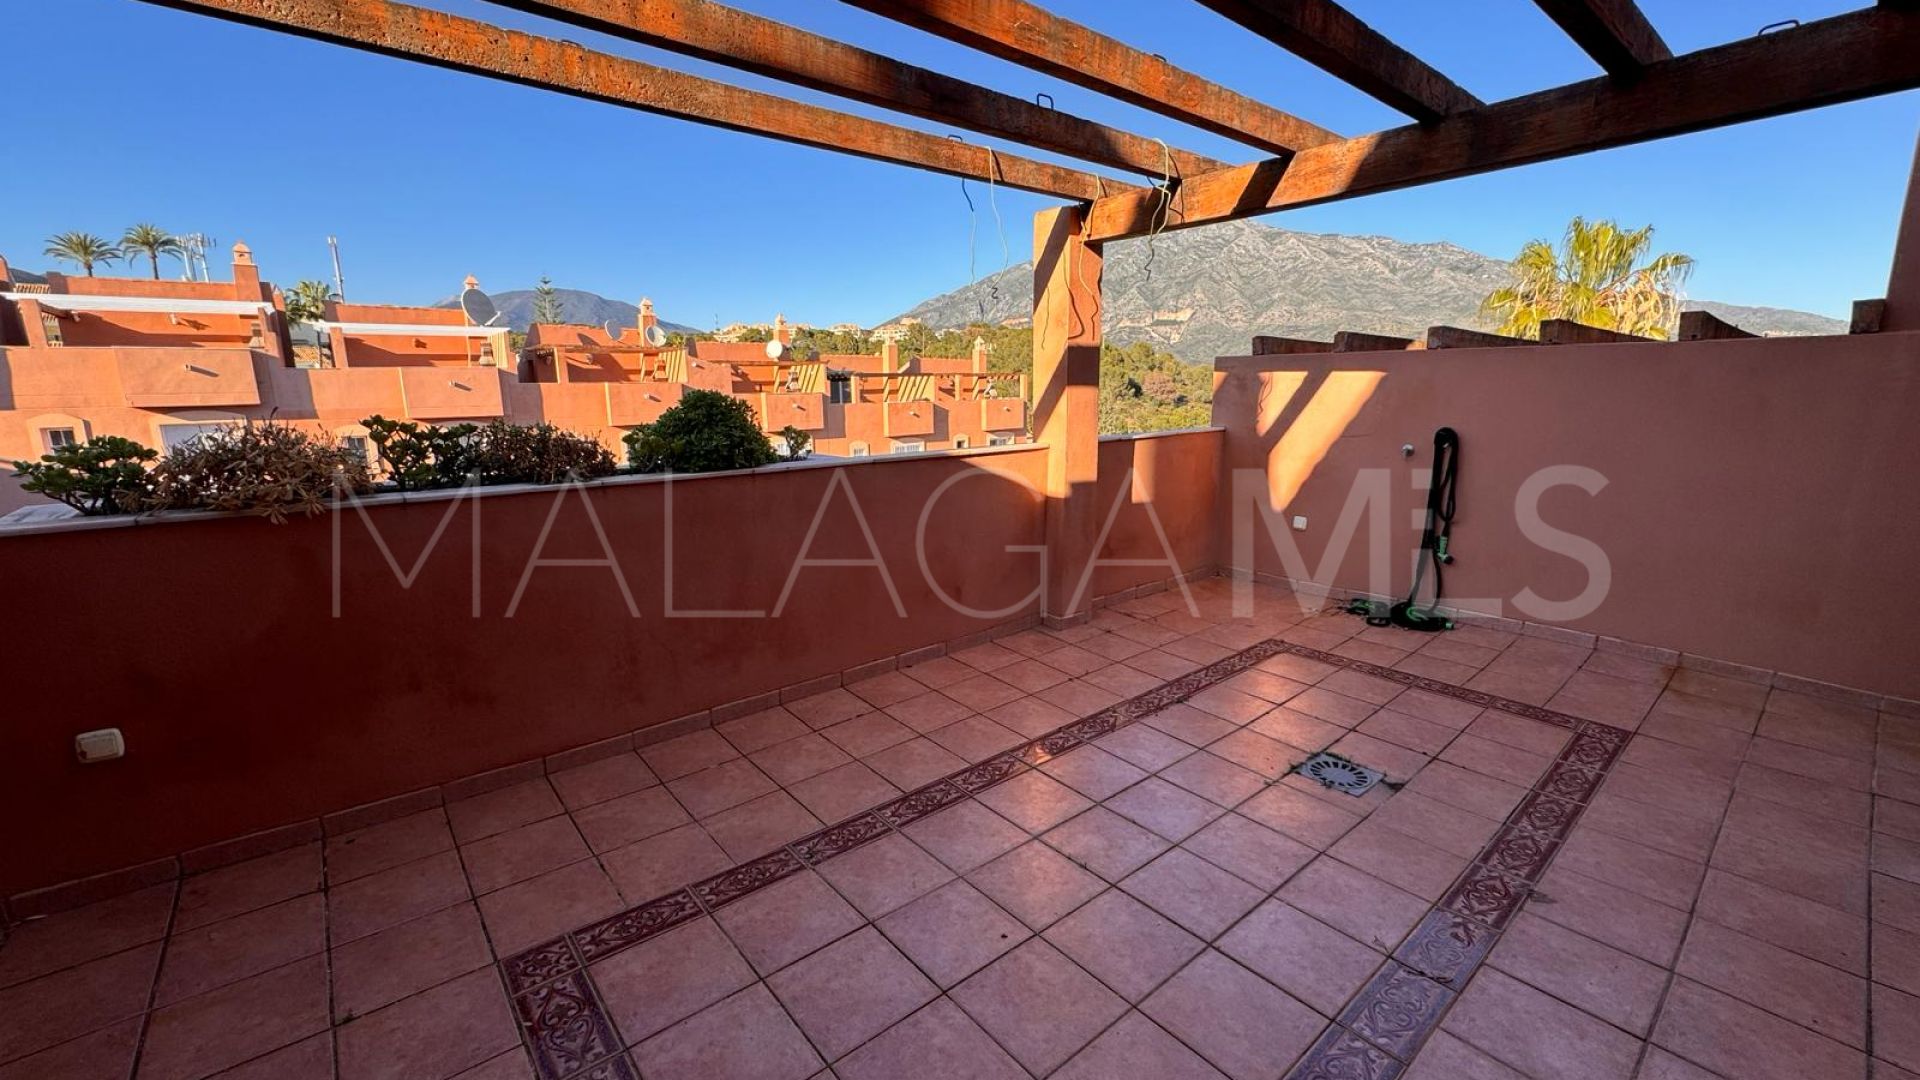 For sale town house in La Biznaga with 3 bedrooms